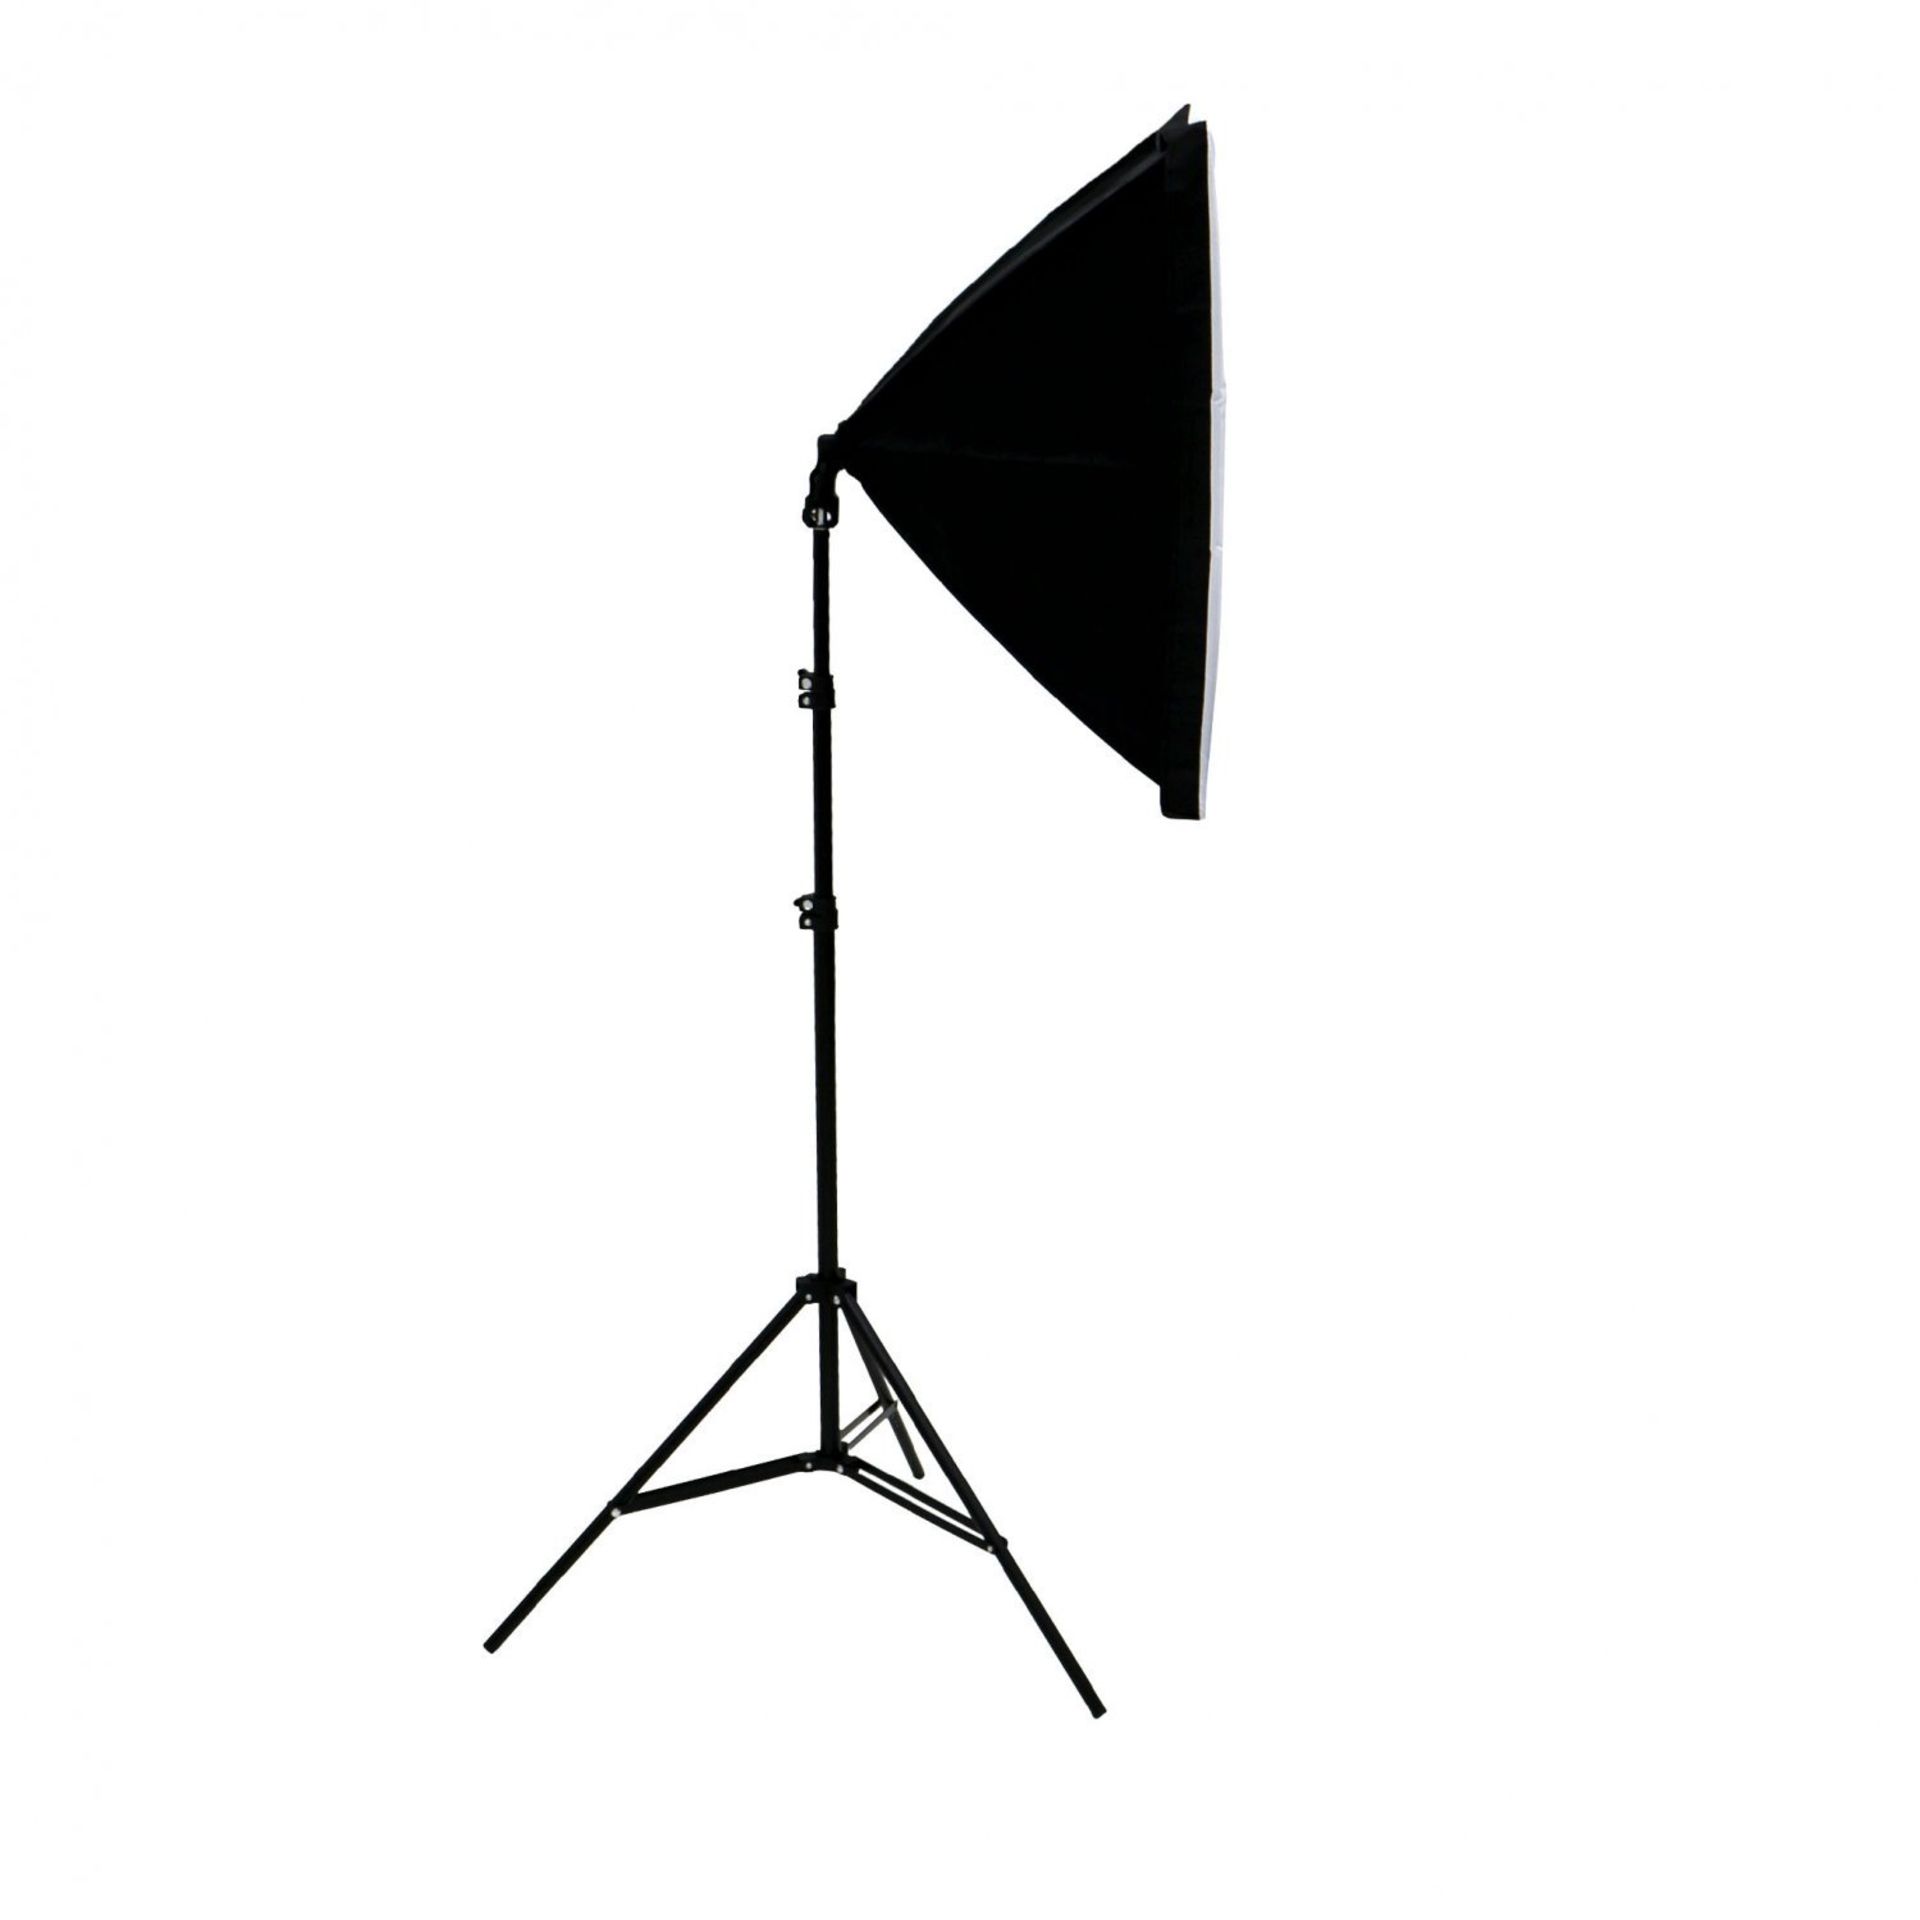 (RU390) 150W Studio Continuous Softbox Lighting Kit w/ Adjustable Stand The lighting kit is ... - Image 2 of 2